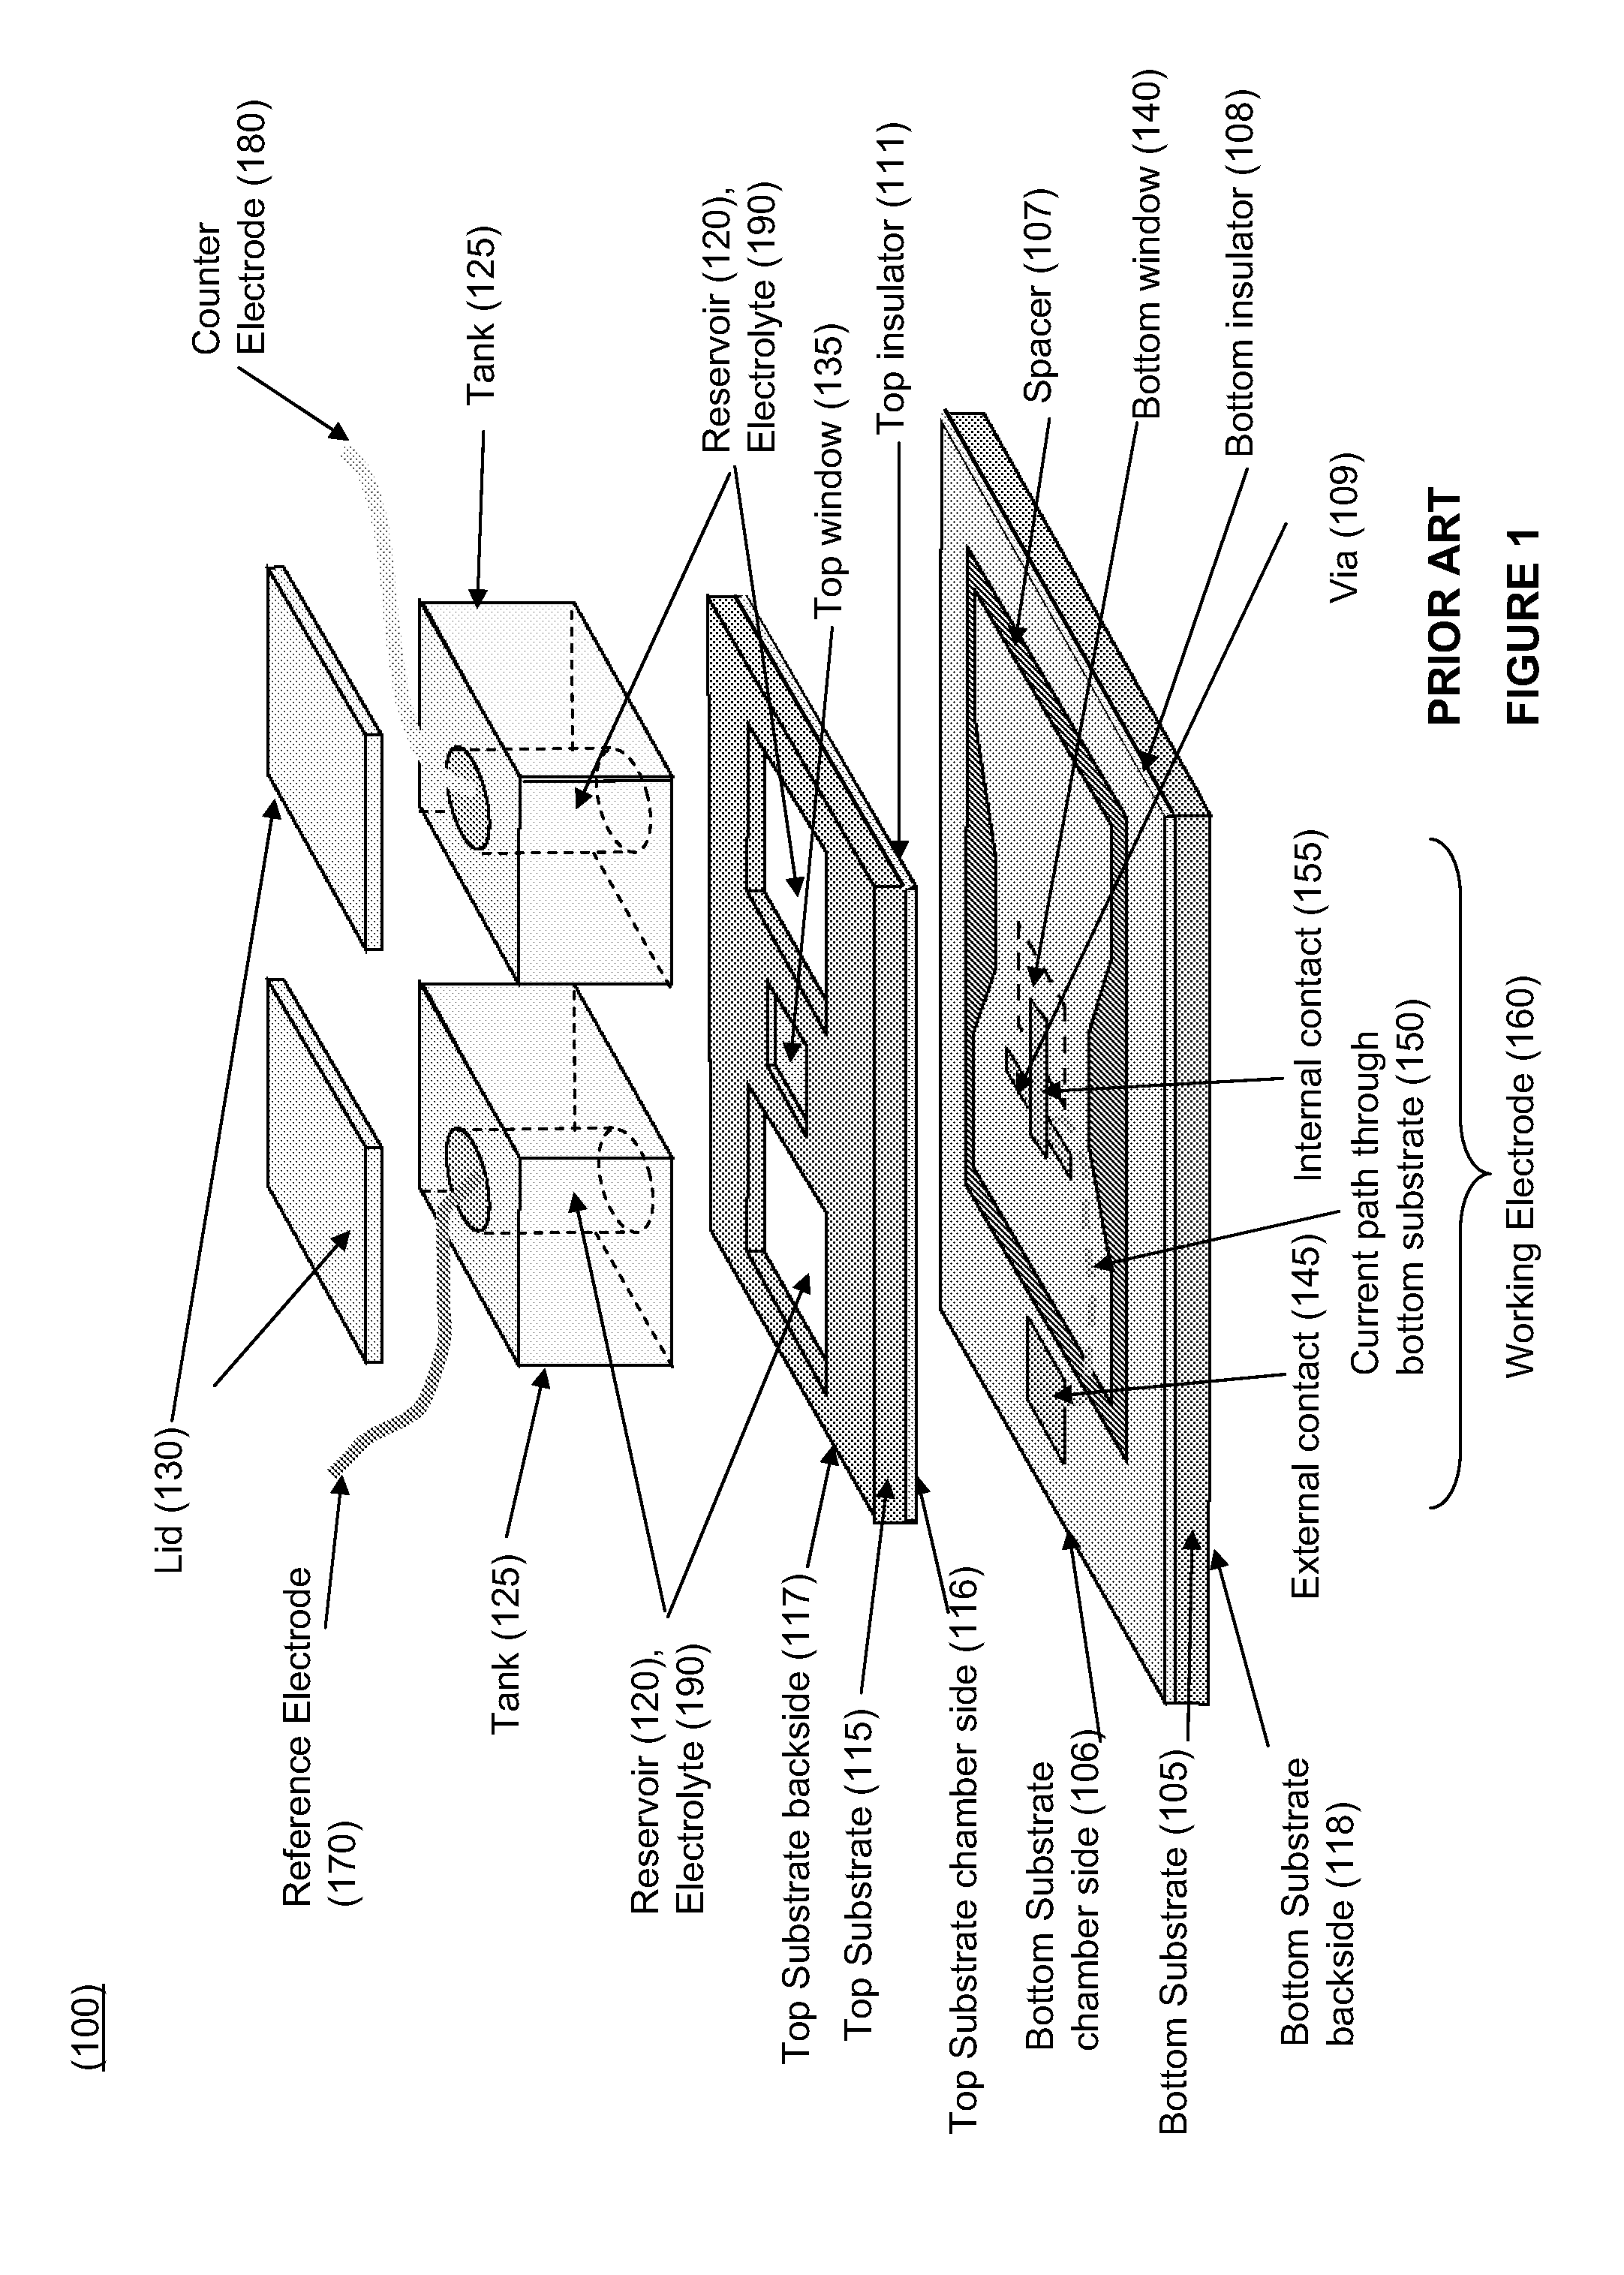 Electrochemical liquid cell apparatus